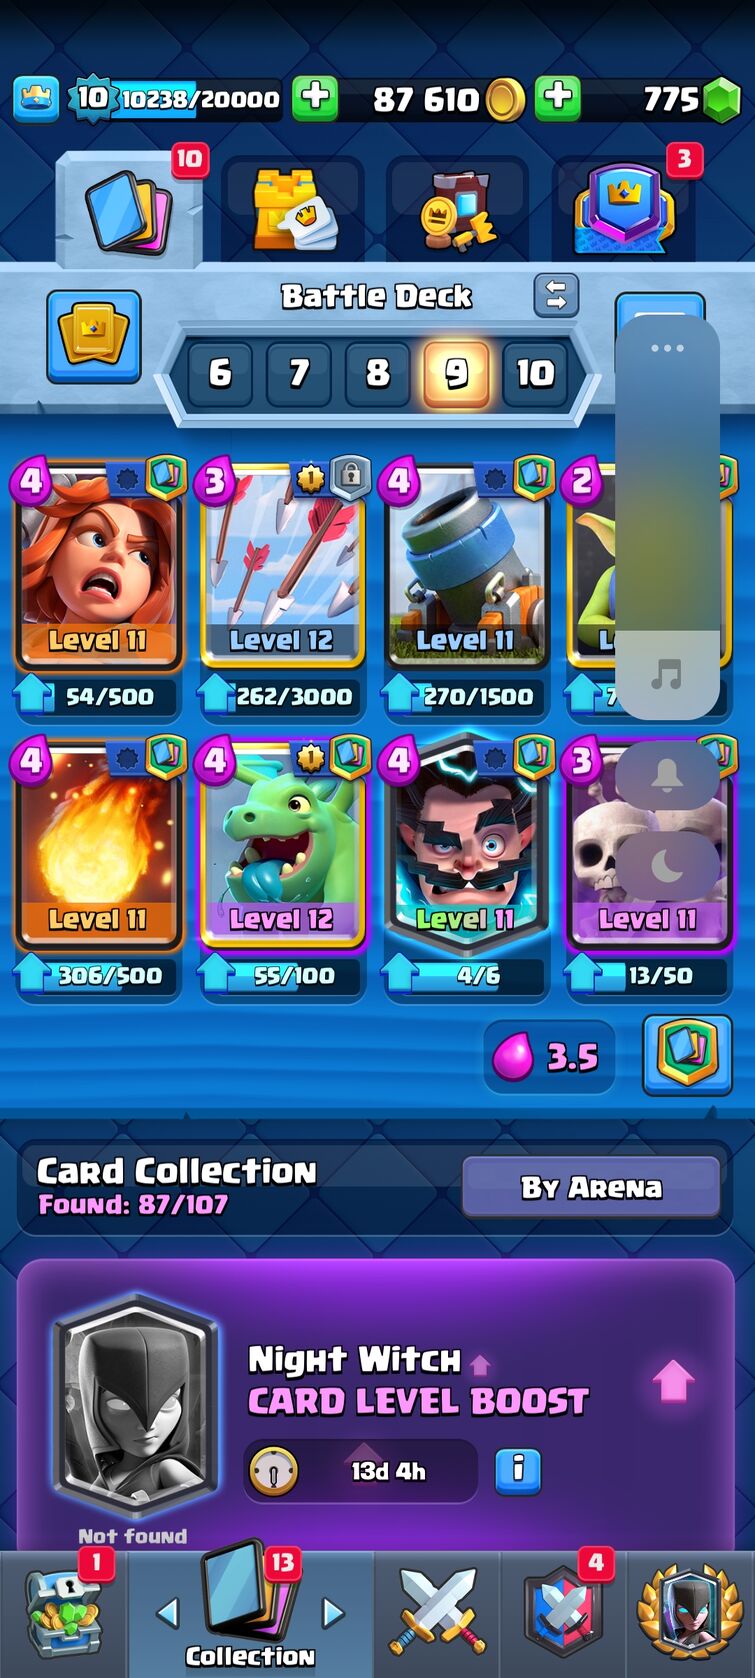 BEST DECK for the *NEW* Arena 14 in Clash Royale! 